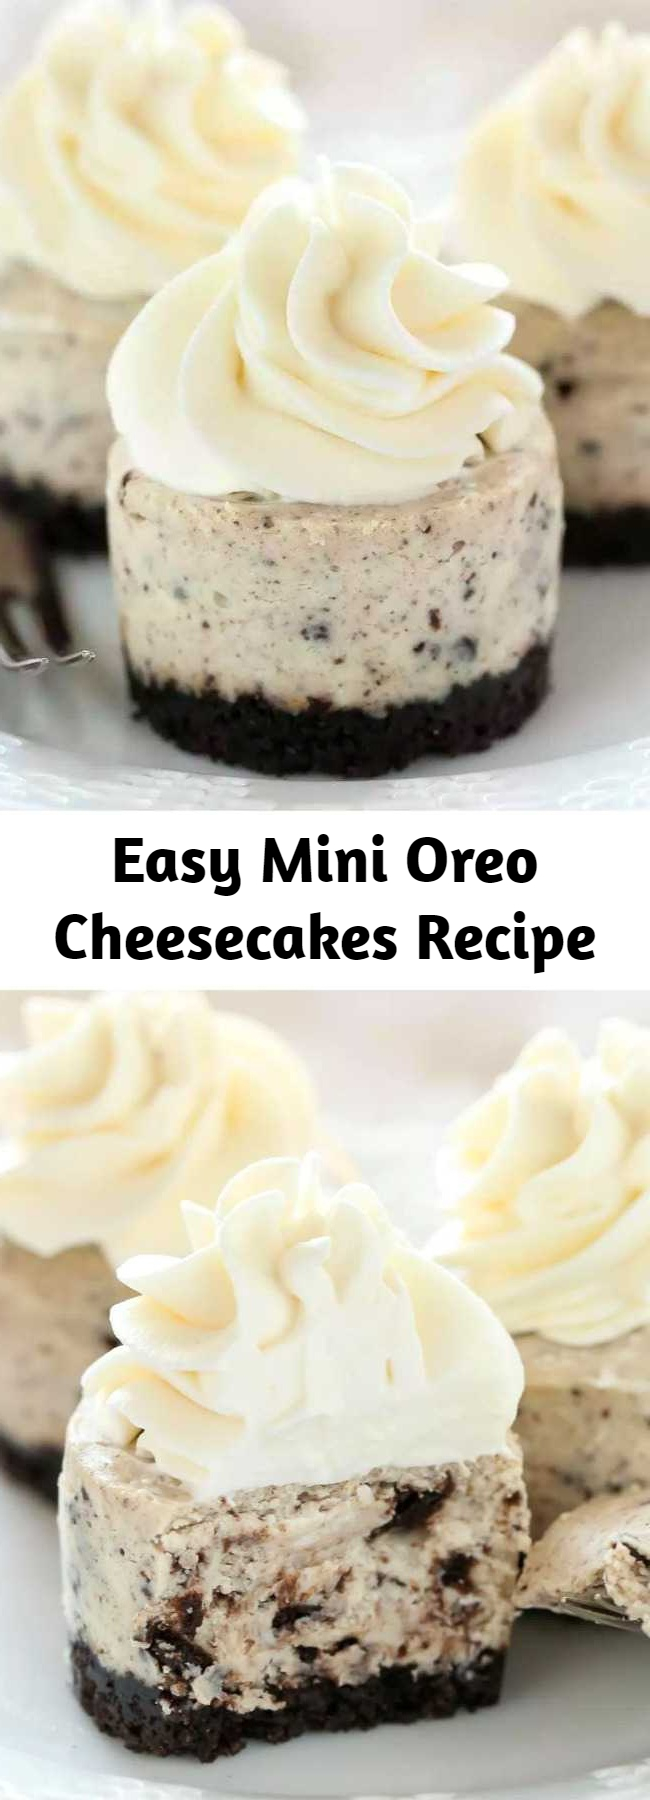 Easy Mini Oreo Cheesecakes Recipe - An easy two ingredient Oreo crust topped with a smooth and creamy Oreo cheesecake filling. These Mini Oreo Cheesecakes make a perfect dessert for any time of year!